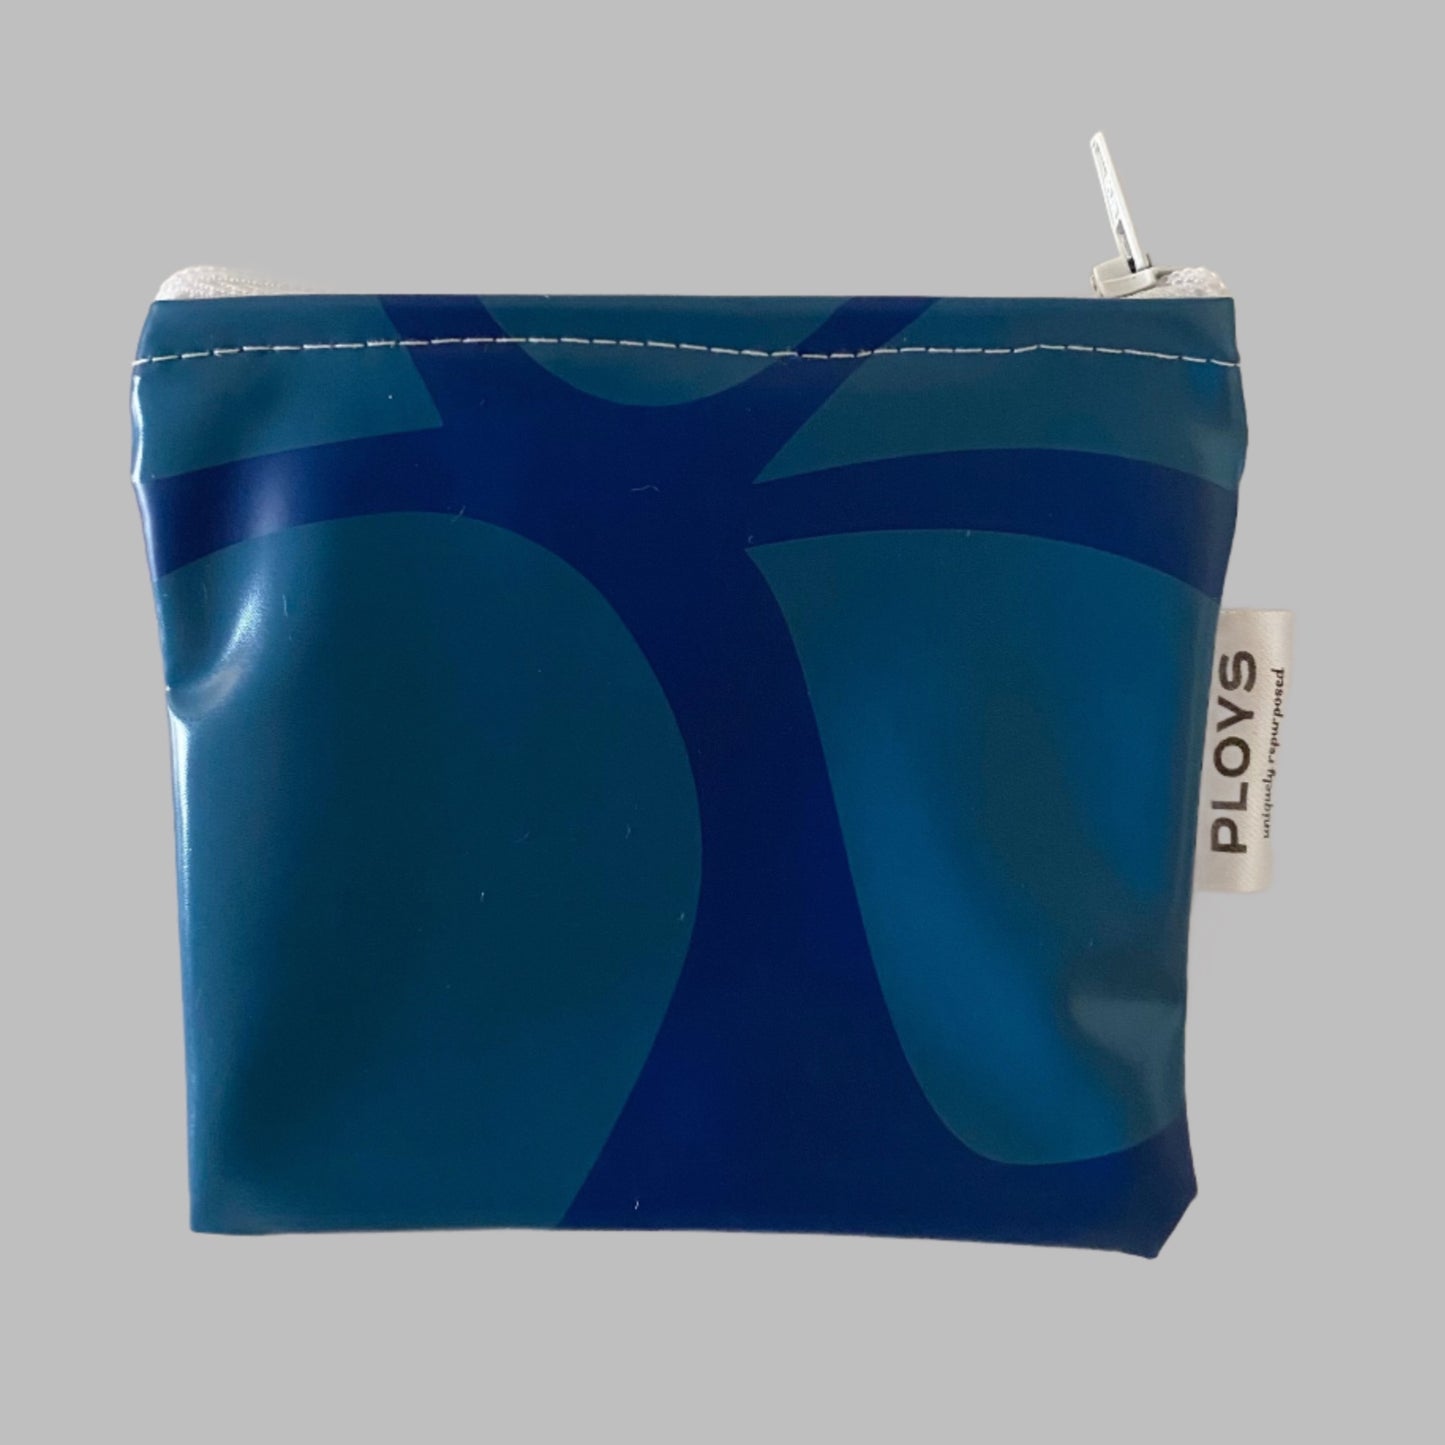 Recycled Wallet, Coin or Credit card purses - ex inflatables - variety of colours